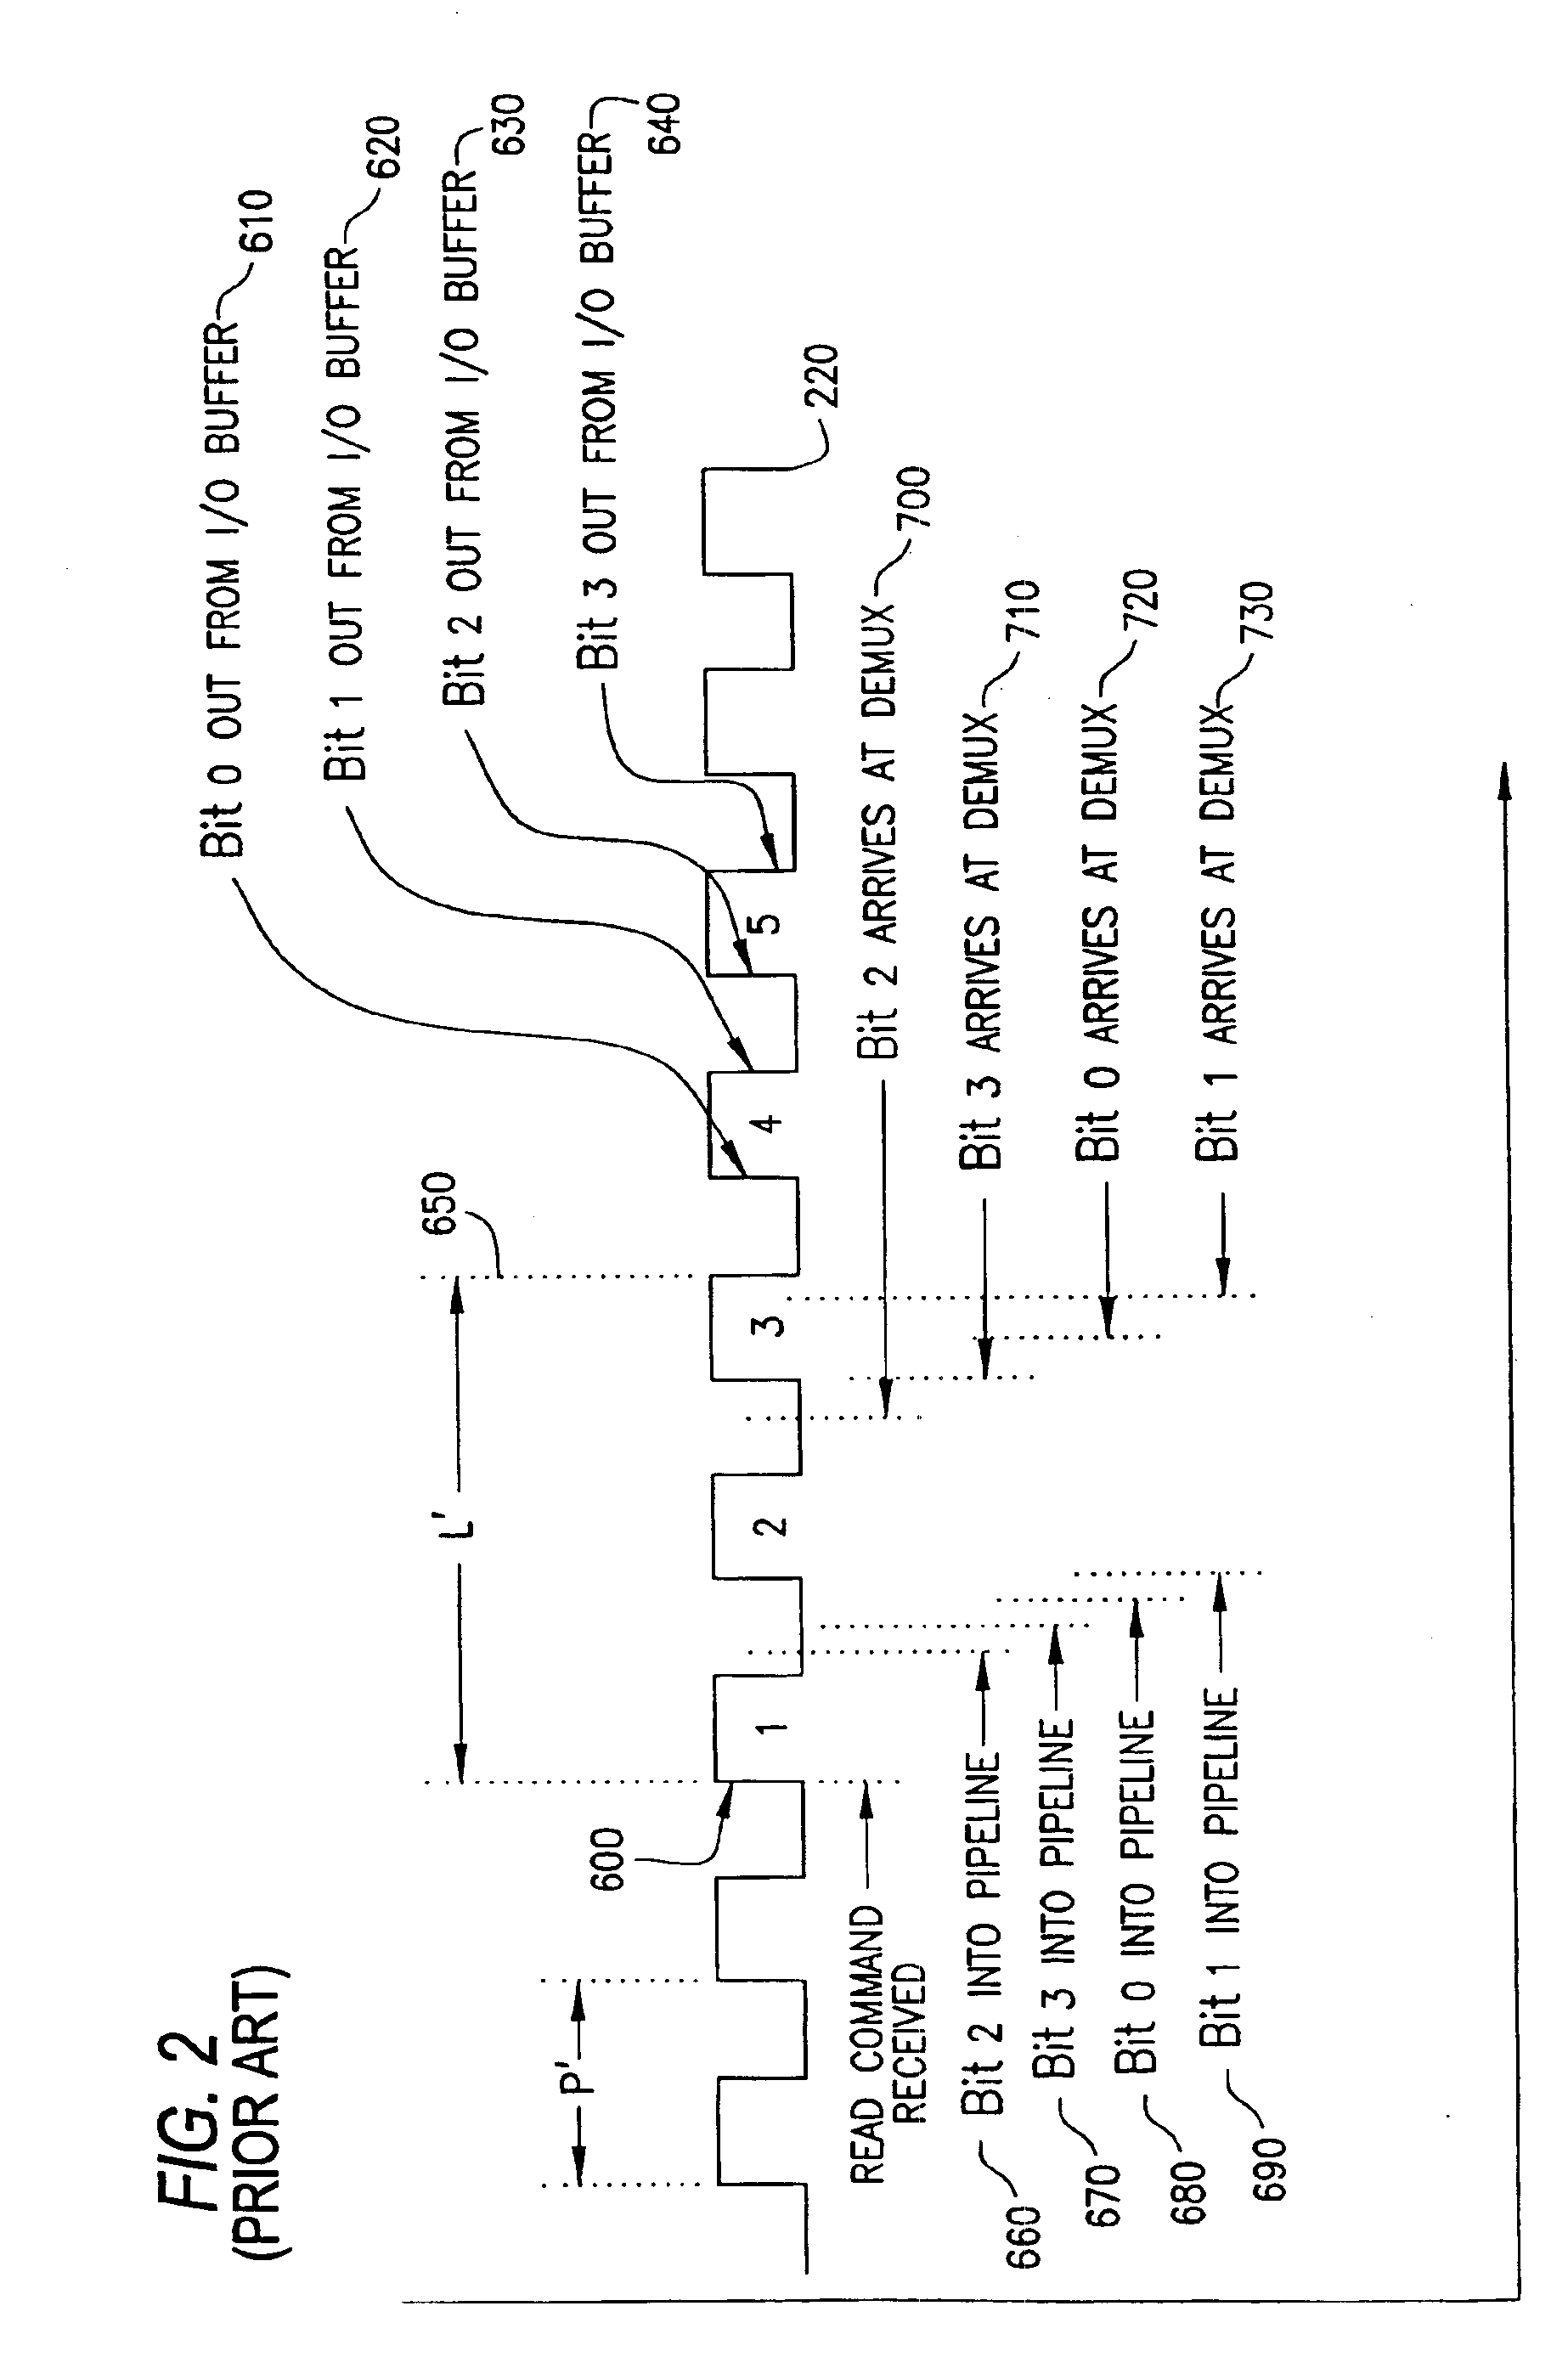 System and method for operating a memory array